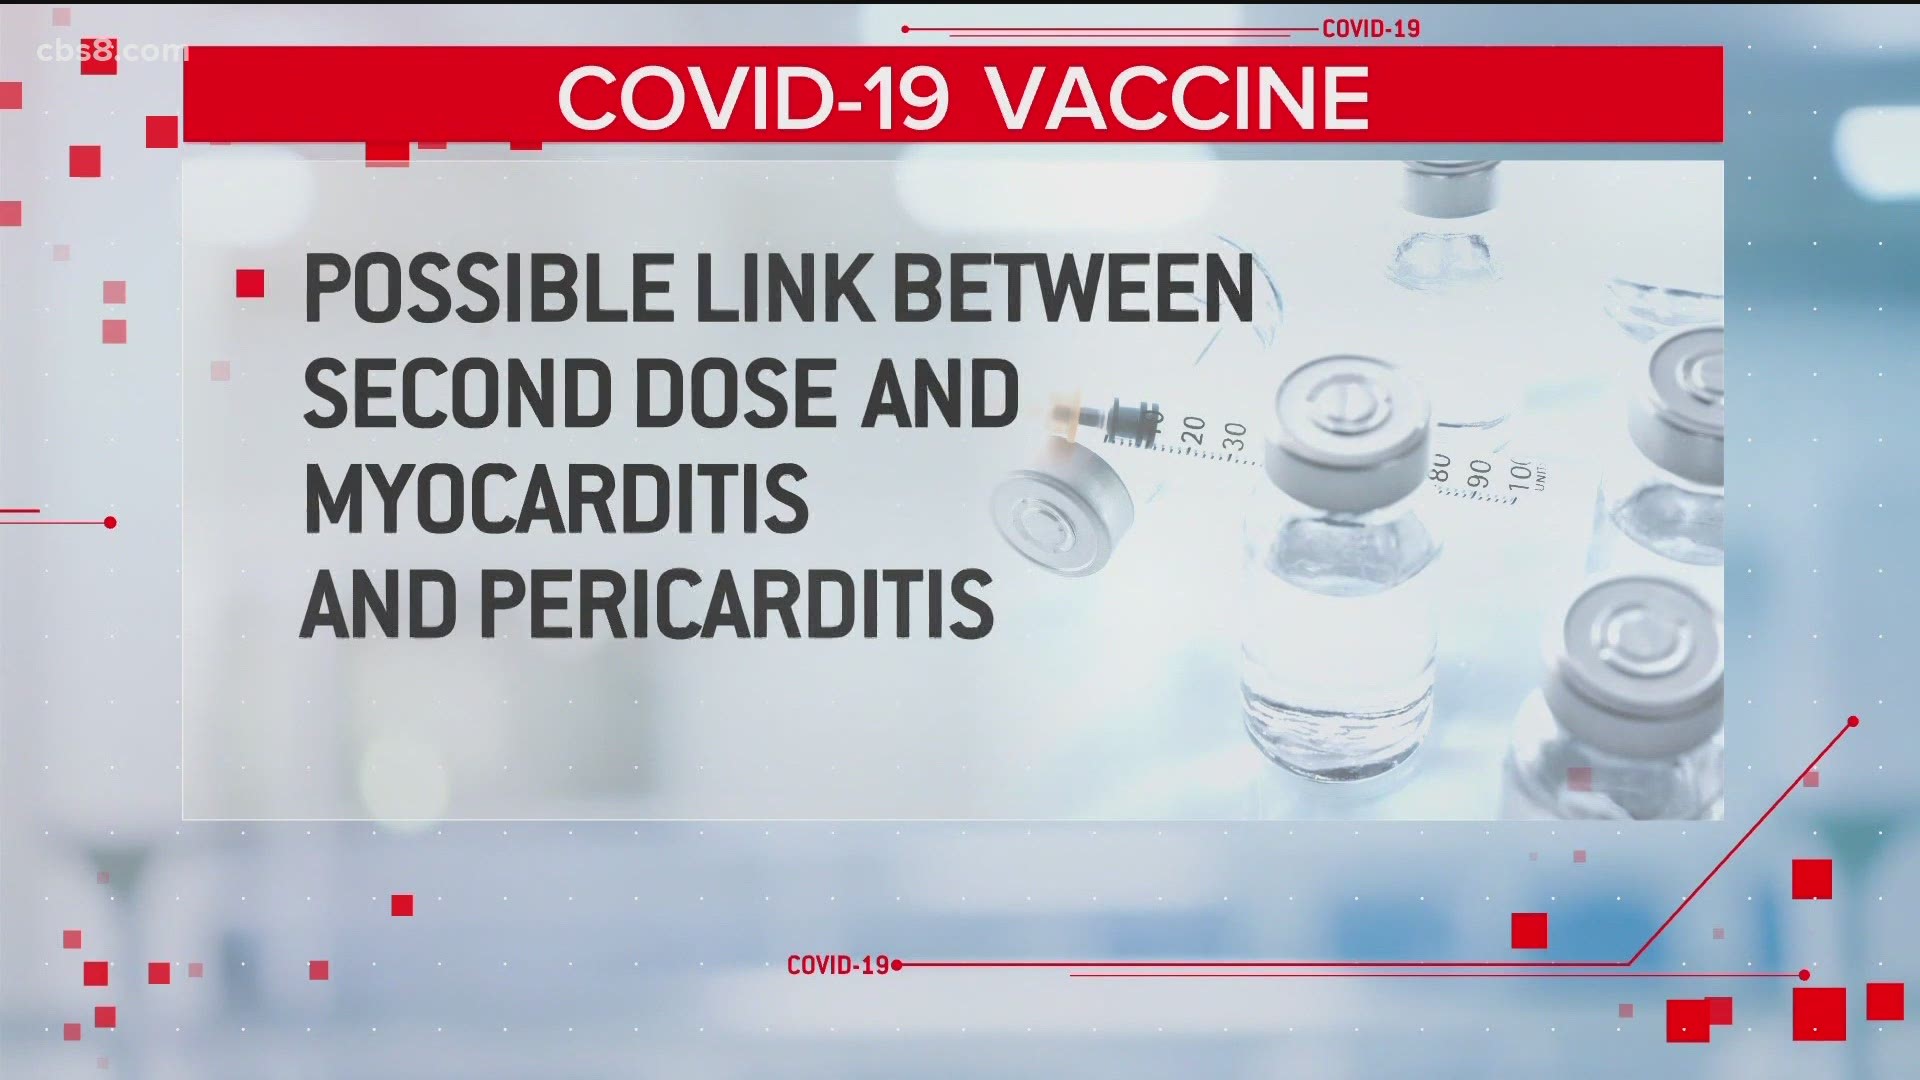 New reports from the CDC show some teenagers and young adults having symptoms of heart conditions after getting the second dose of the COVID vaccine.